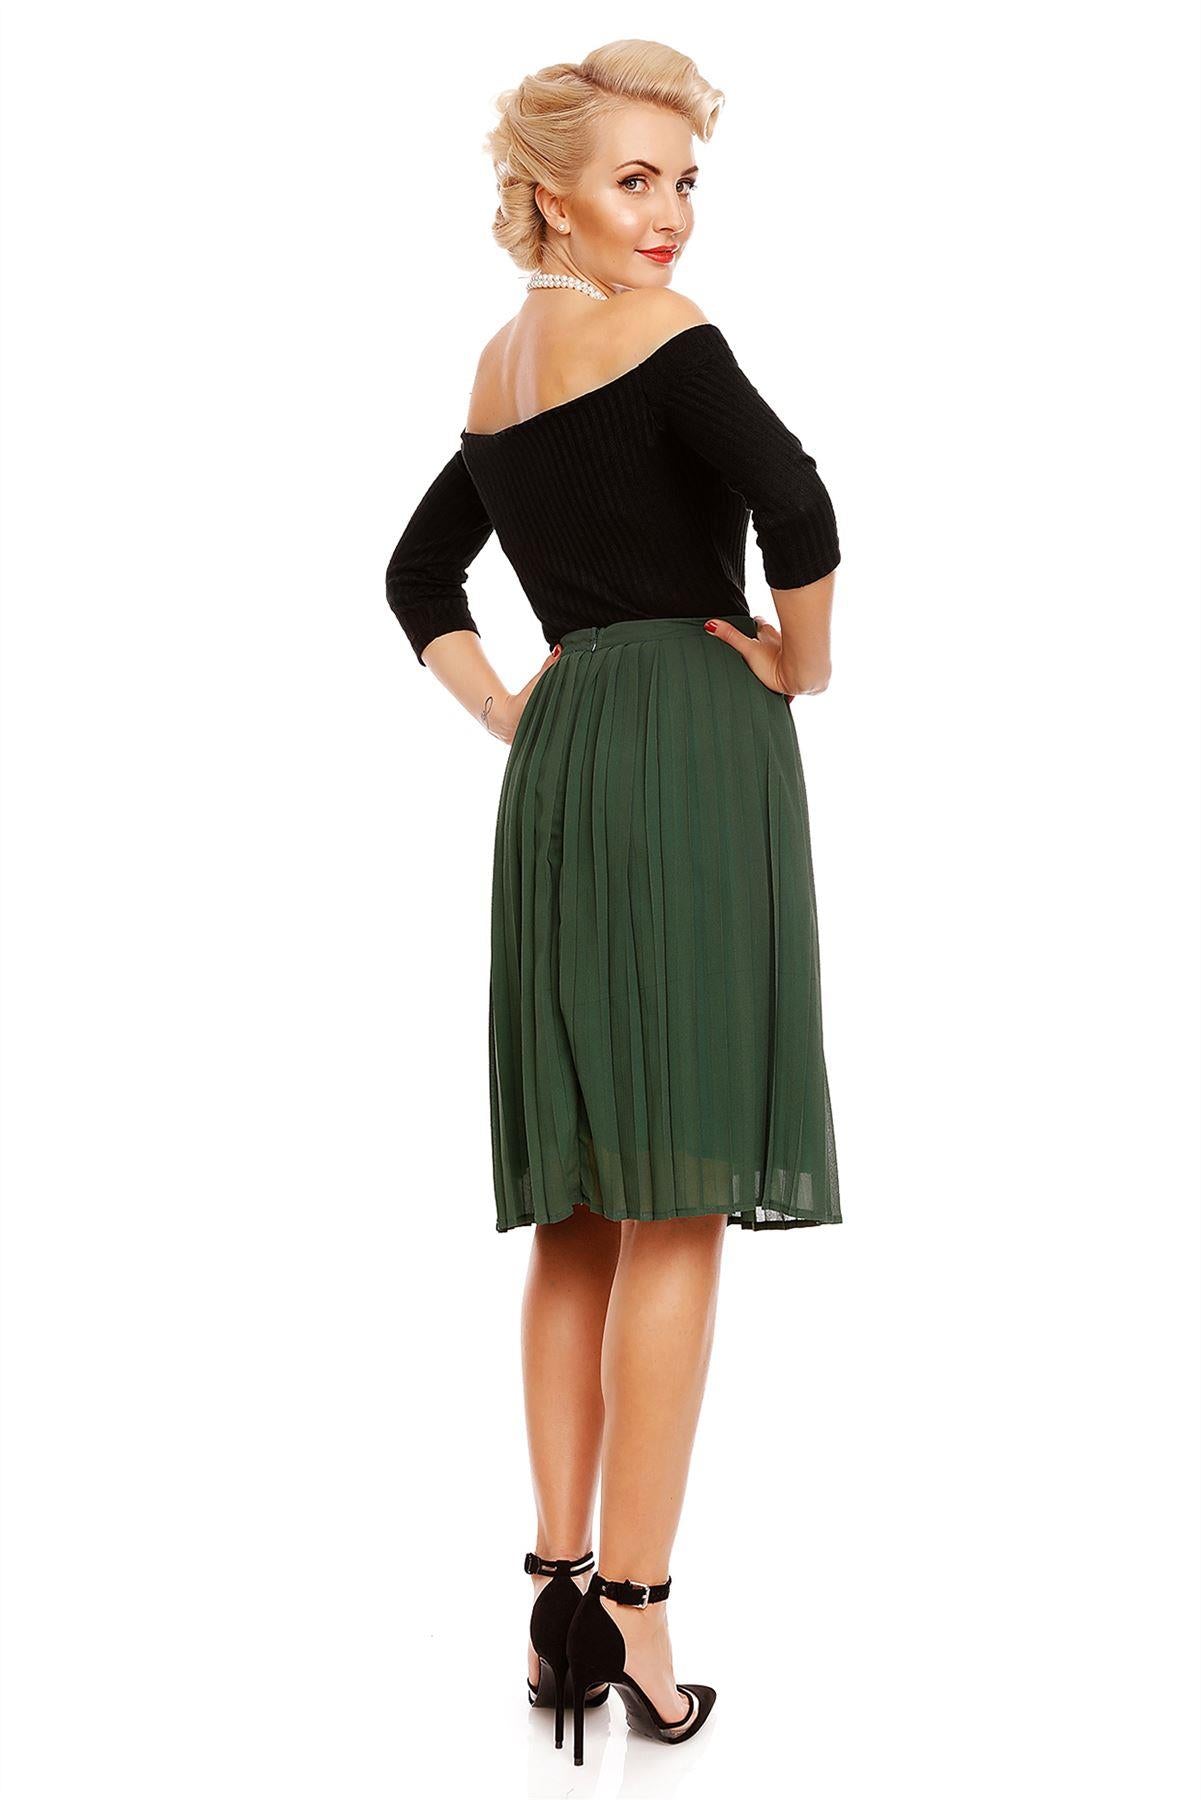 Model wearing our Gloria off-shoulder long sleeve top in black, with a green skirt, back view